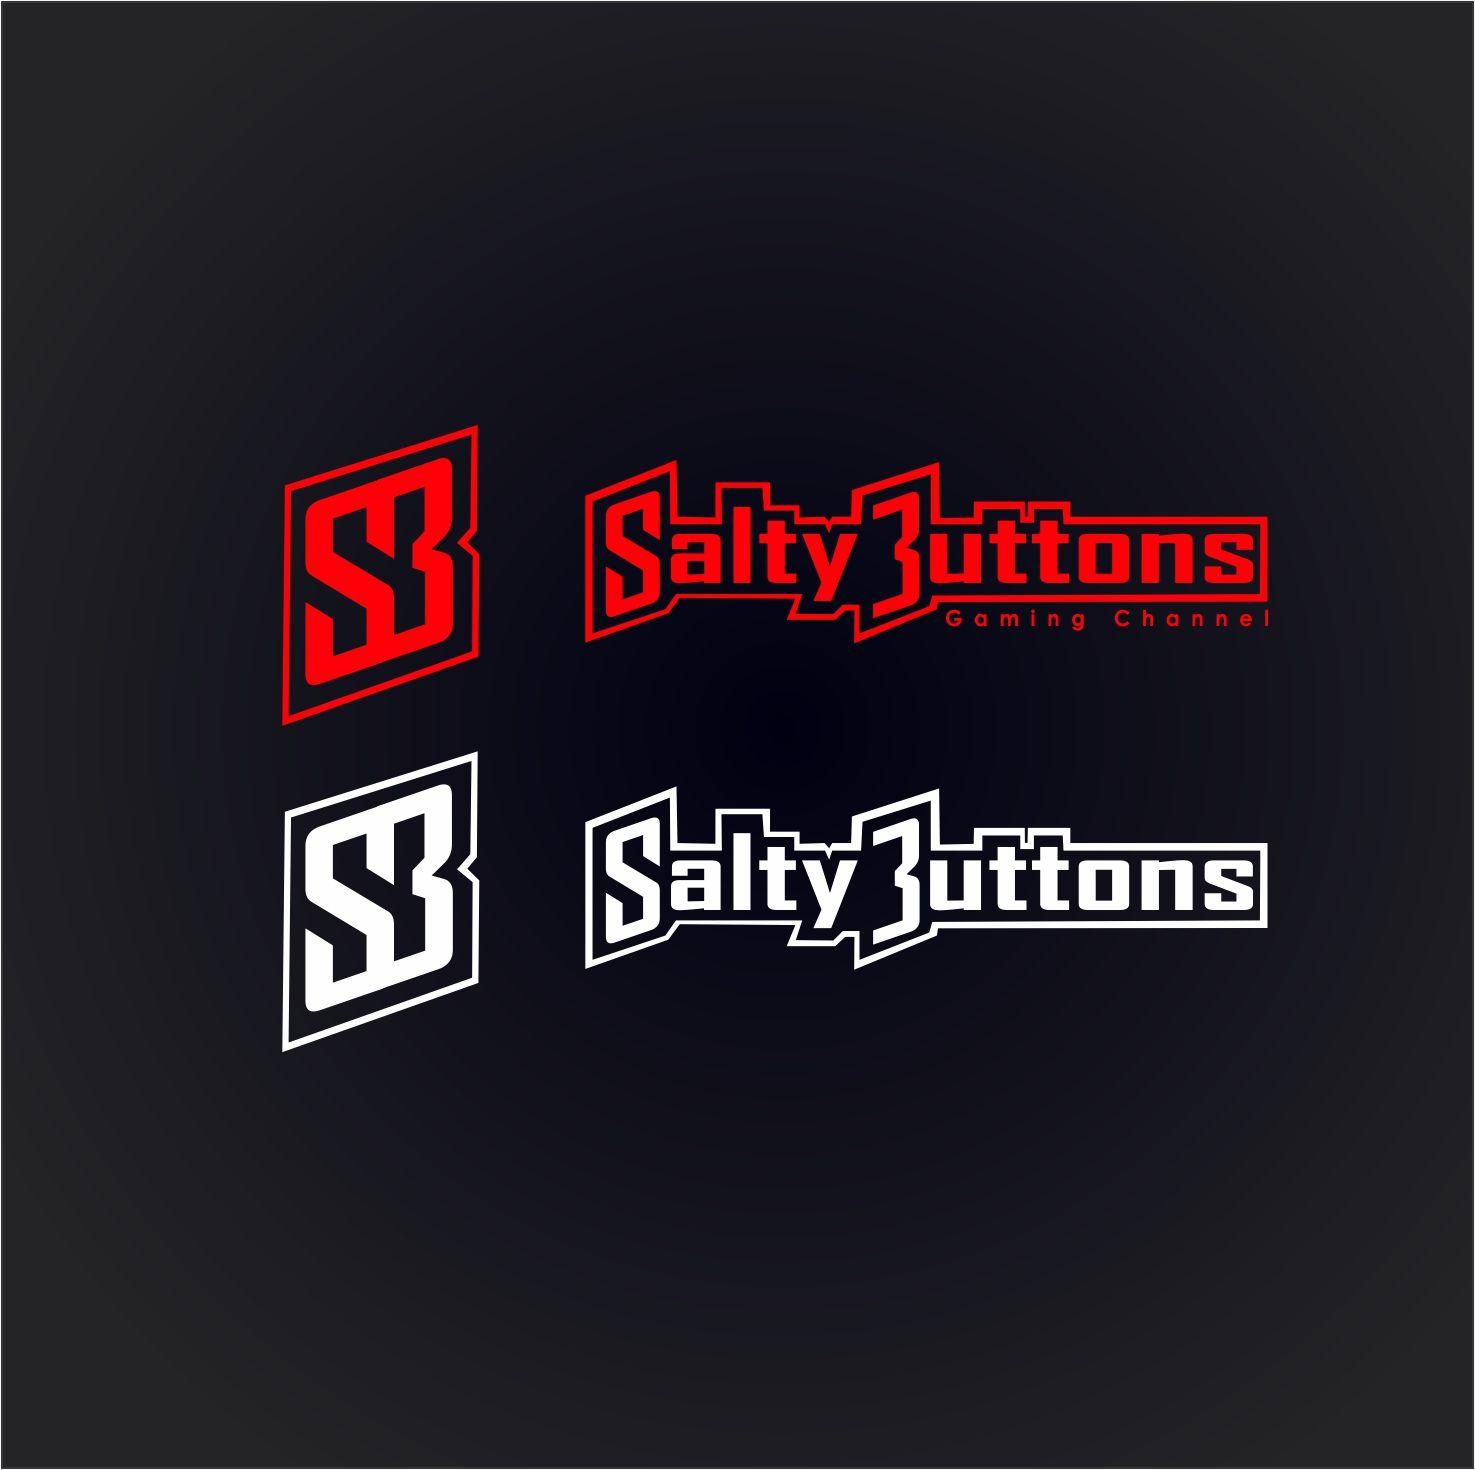 SB Logo - Bold, Playful, Youtube Logo Design for salty_buttons or SB to